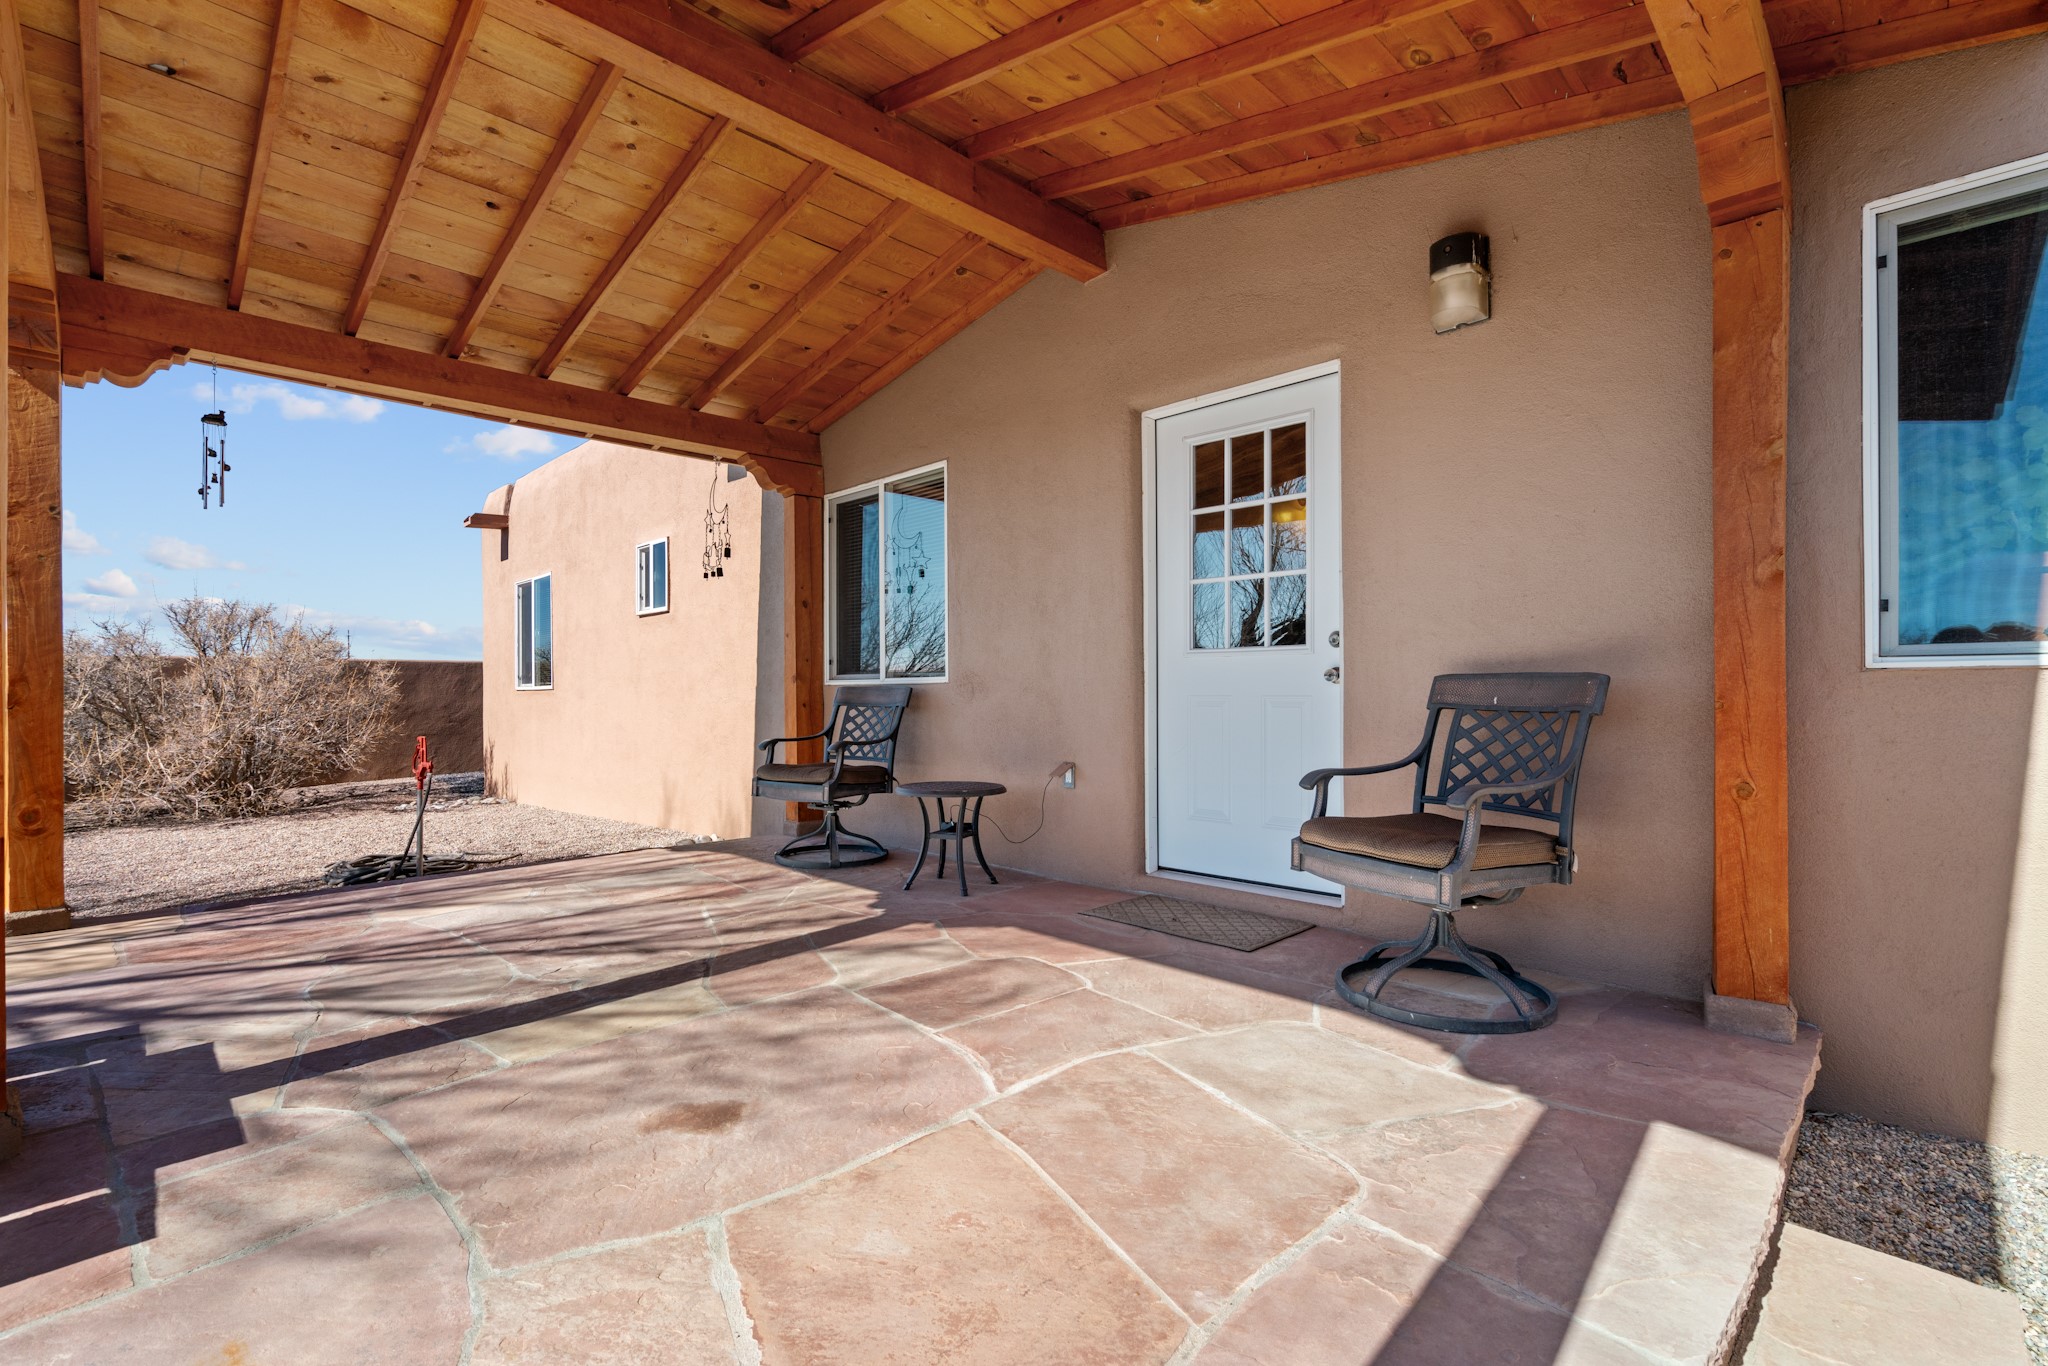 4 S Chamisa Drive, Santa Fe, New Mexico 87508, 3 Bedrooms Bedrooms, ,2 BathroomsBathrooms,Residential,For Sale,4 S Chamisa Drive,202400645